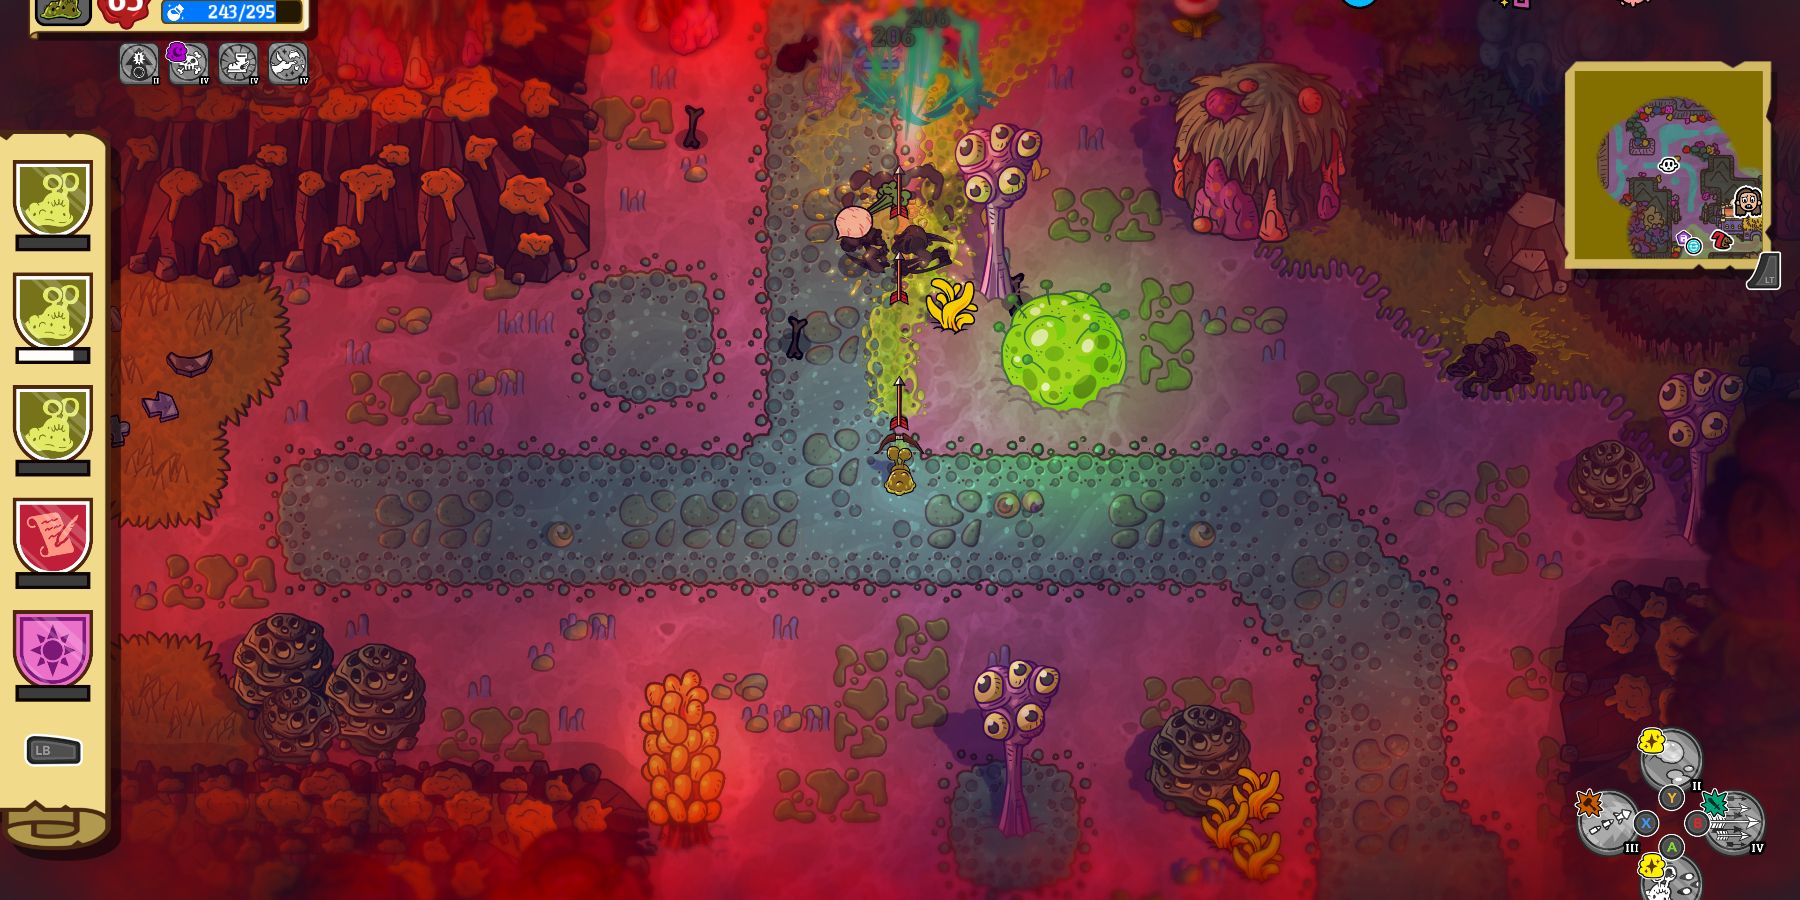 a green slug fires a barrage of arrows at a group of monsters. the surrounding environment is rocky and purplish, with strange, mutated plants all around